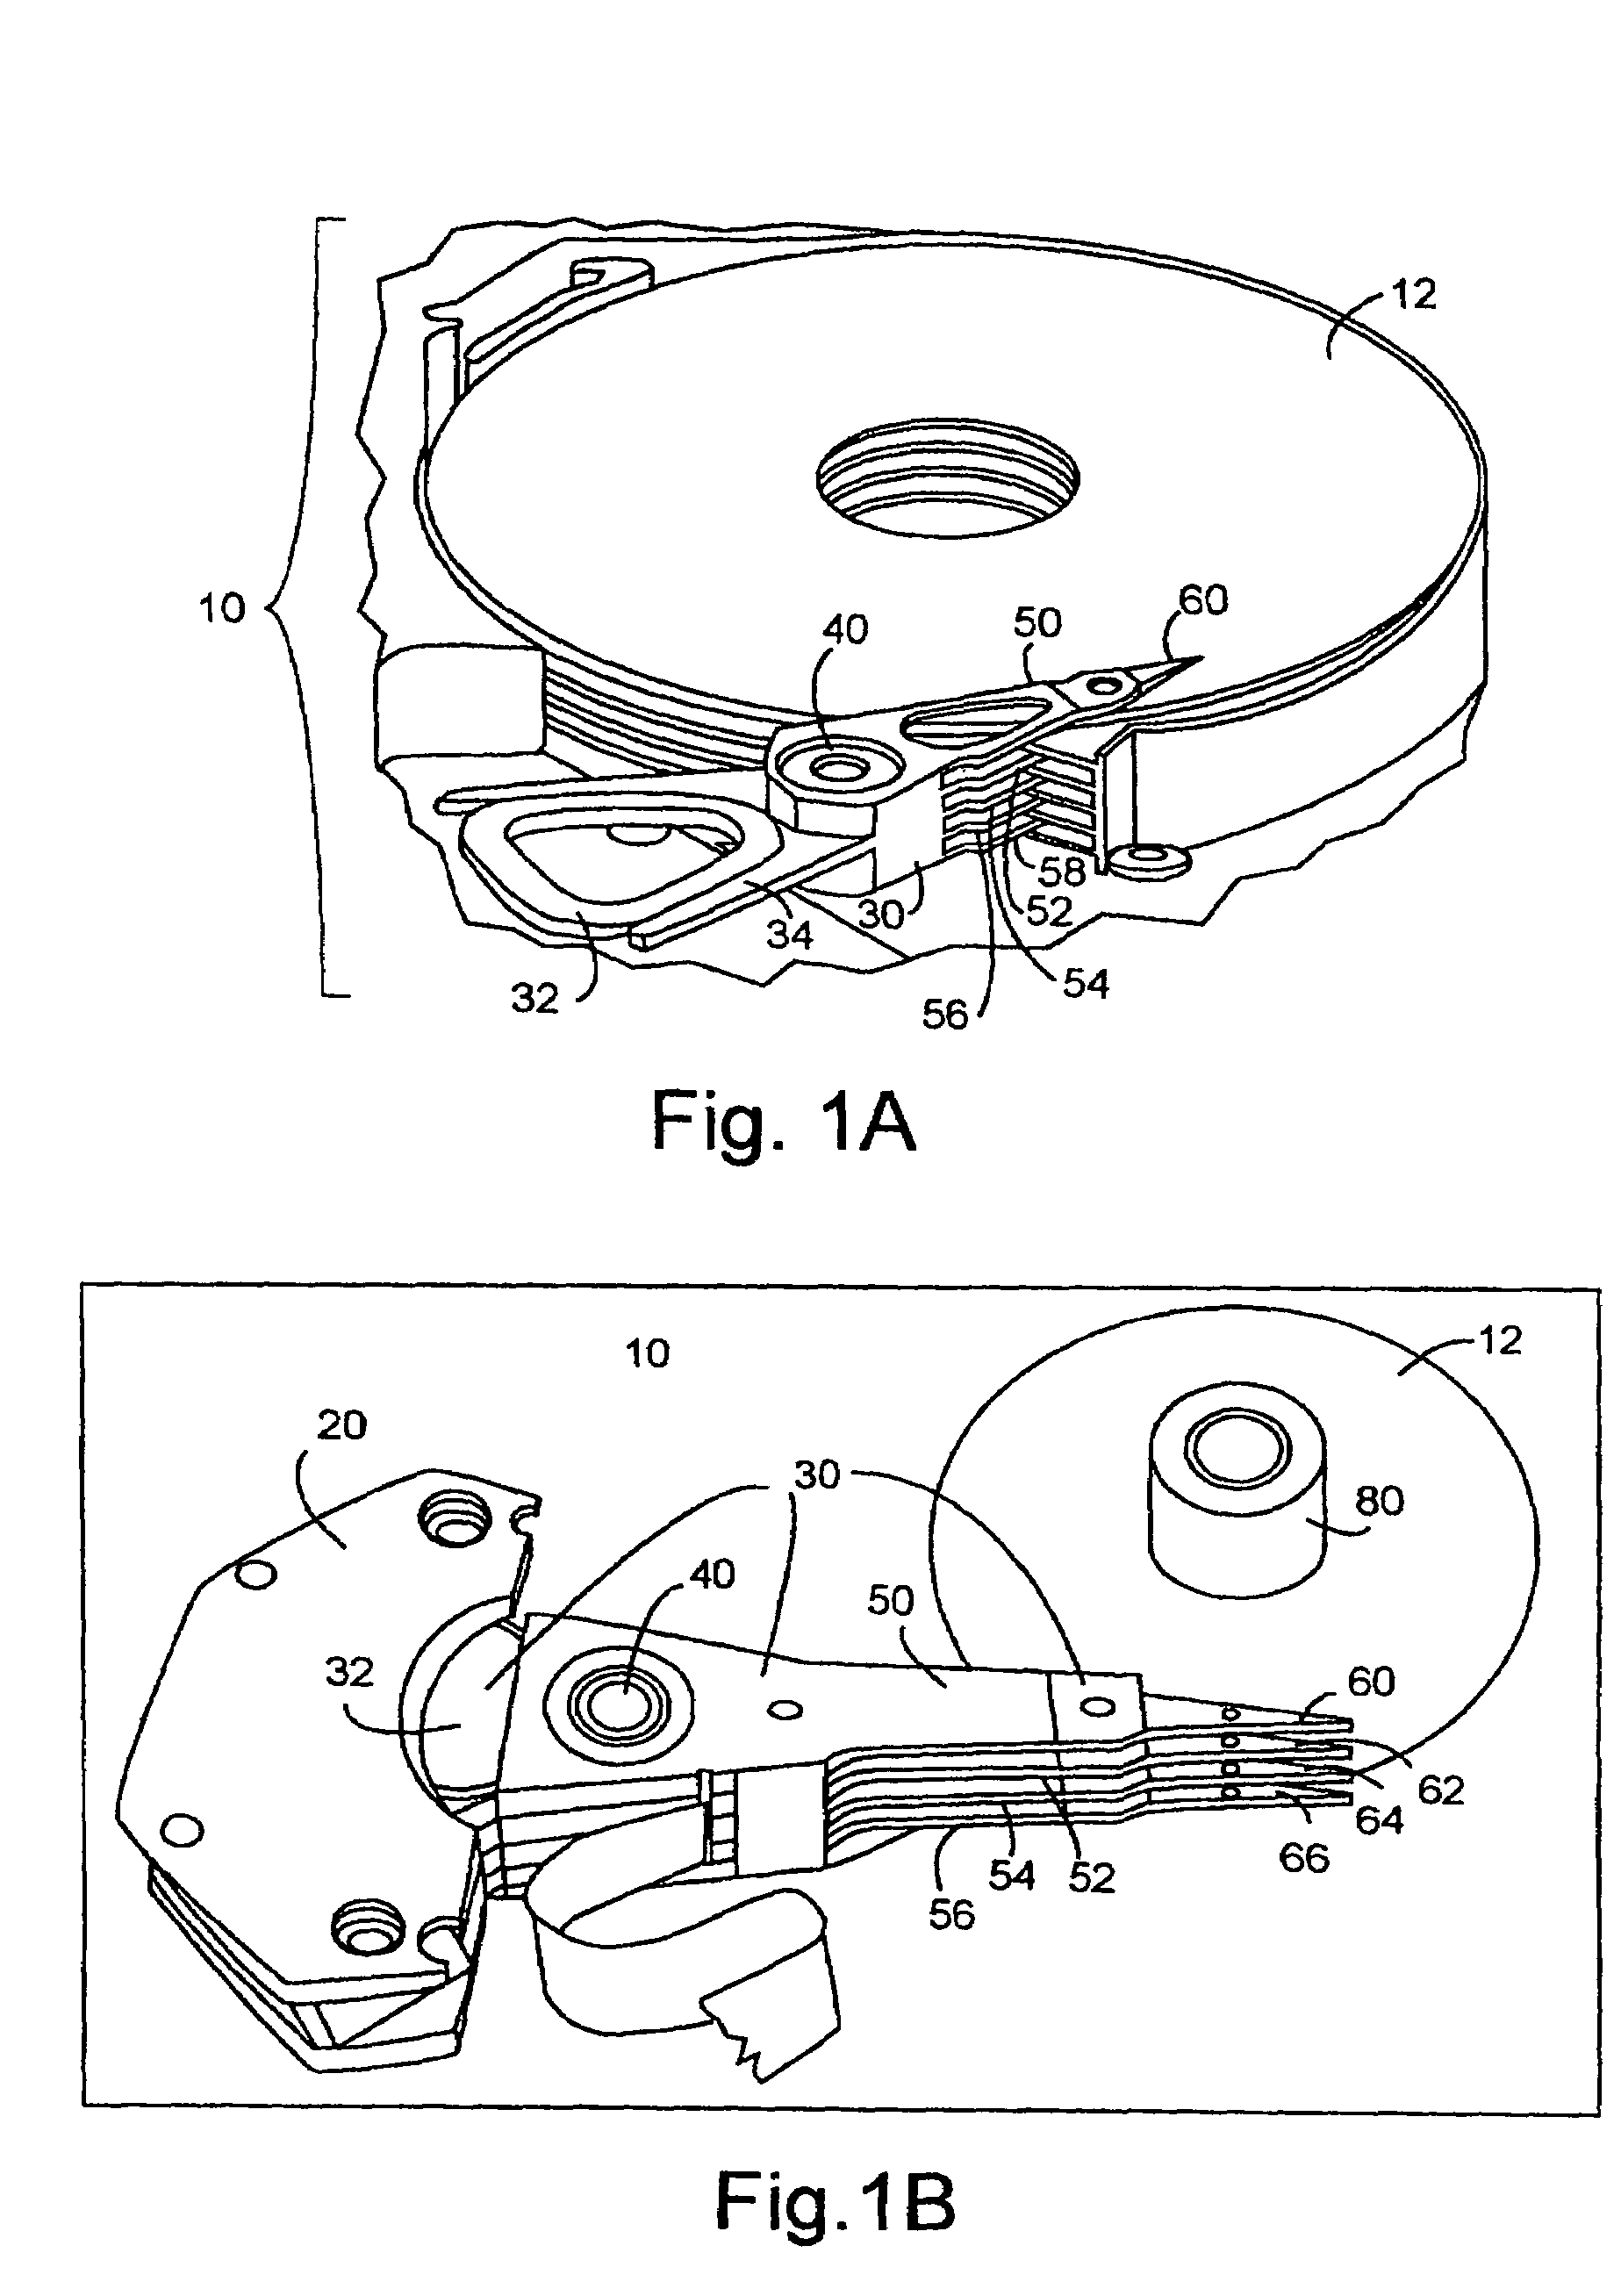 Servo controller method and apparatus for high tracks per inch hard disk drives using a delay accomodating state estimator